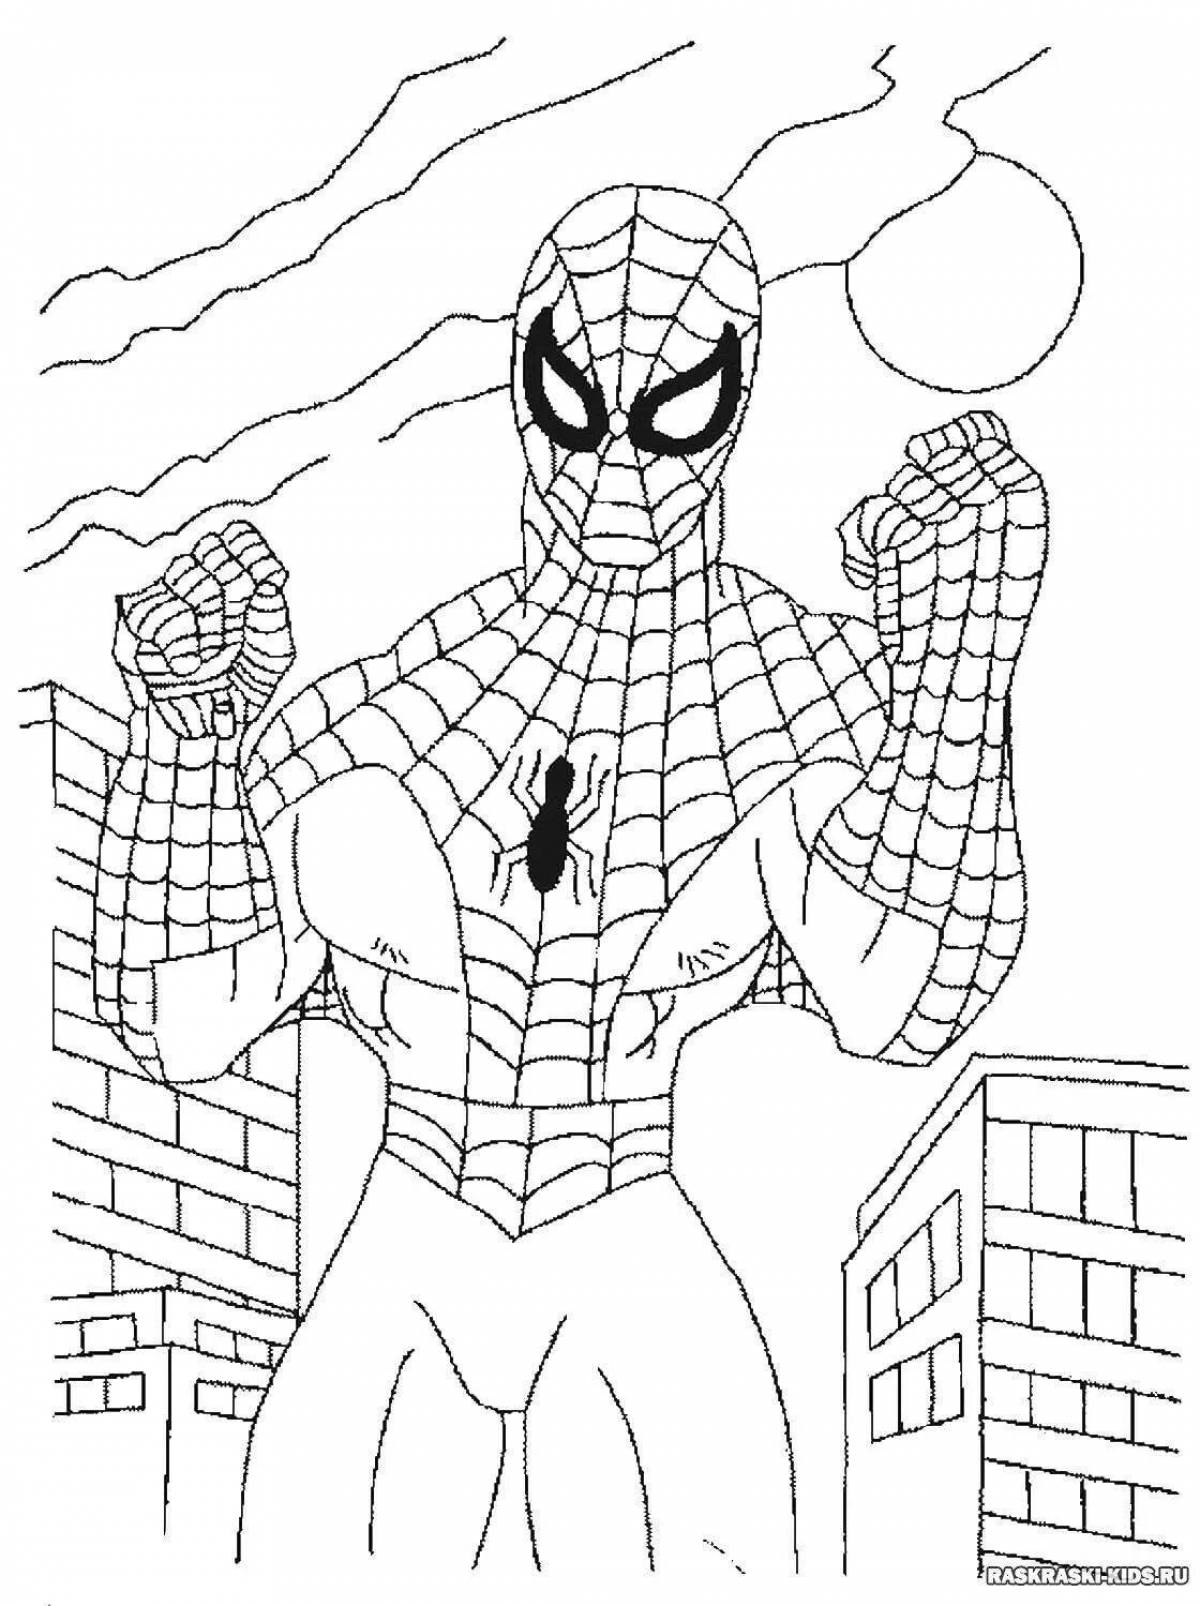 Spiderman coloring book for kids 6-7 years old